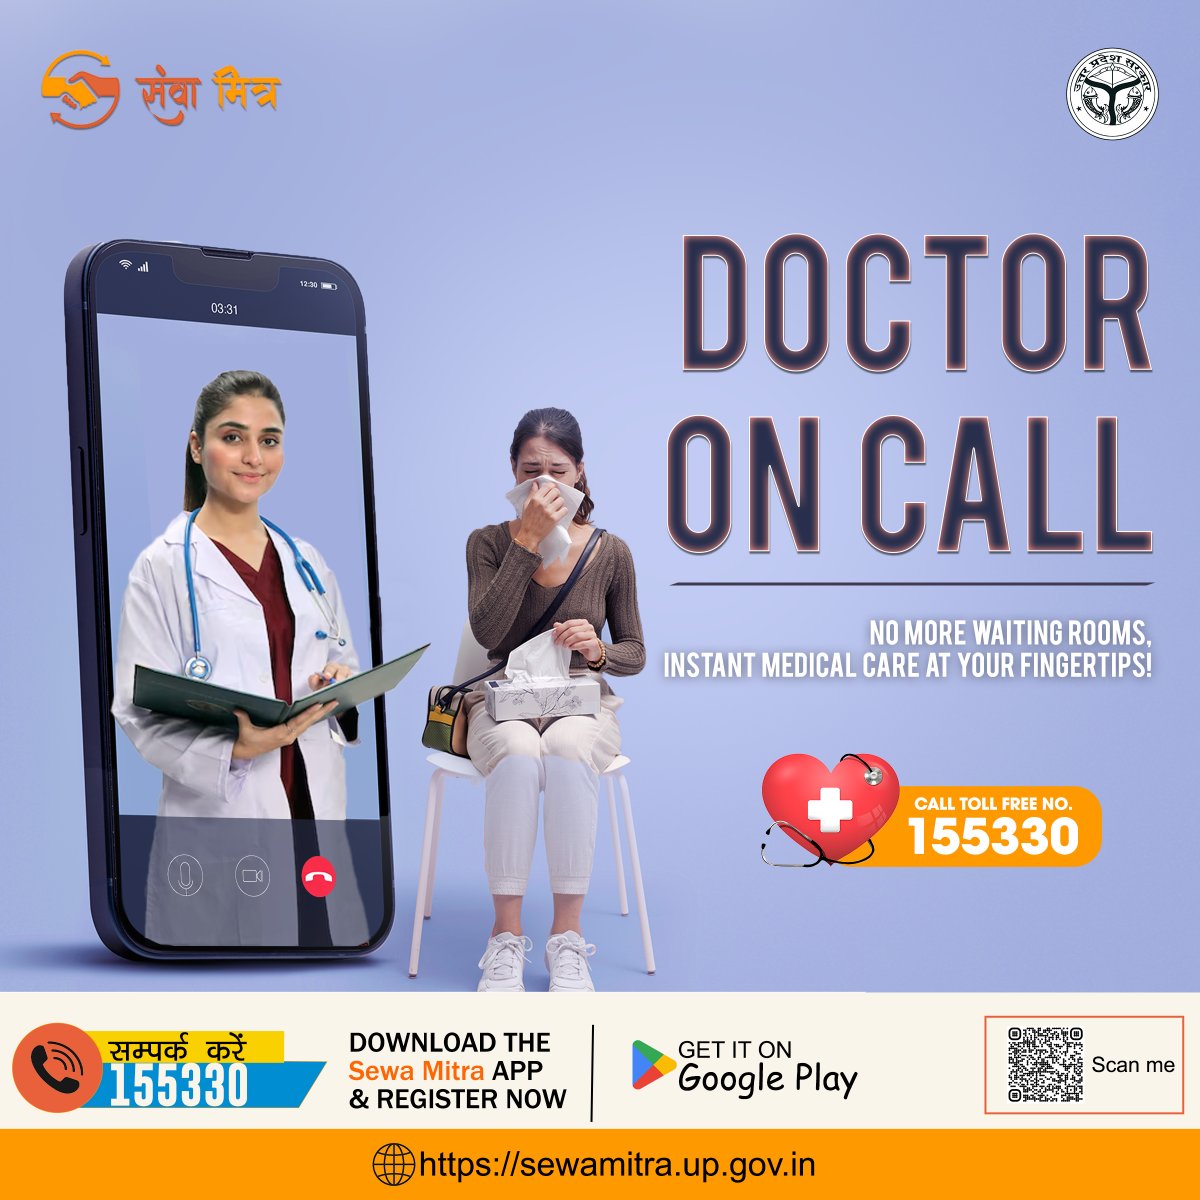 Call Toll-Free No. 155330 📞 for Urgent Medical Needs and Experience Expert Medical Care with Our Doctor on Call Services👩‍⚕️ 24/7.

visit: sewamitra.up.gov.in

#Sewamitra #Sewamitraservices #doctoroncall #onlinedoctor #medicaladvice #medicaldoctor #urgentcare